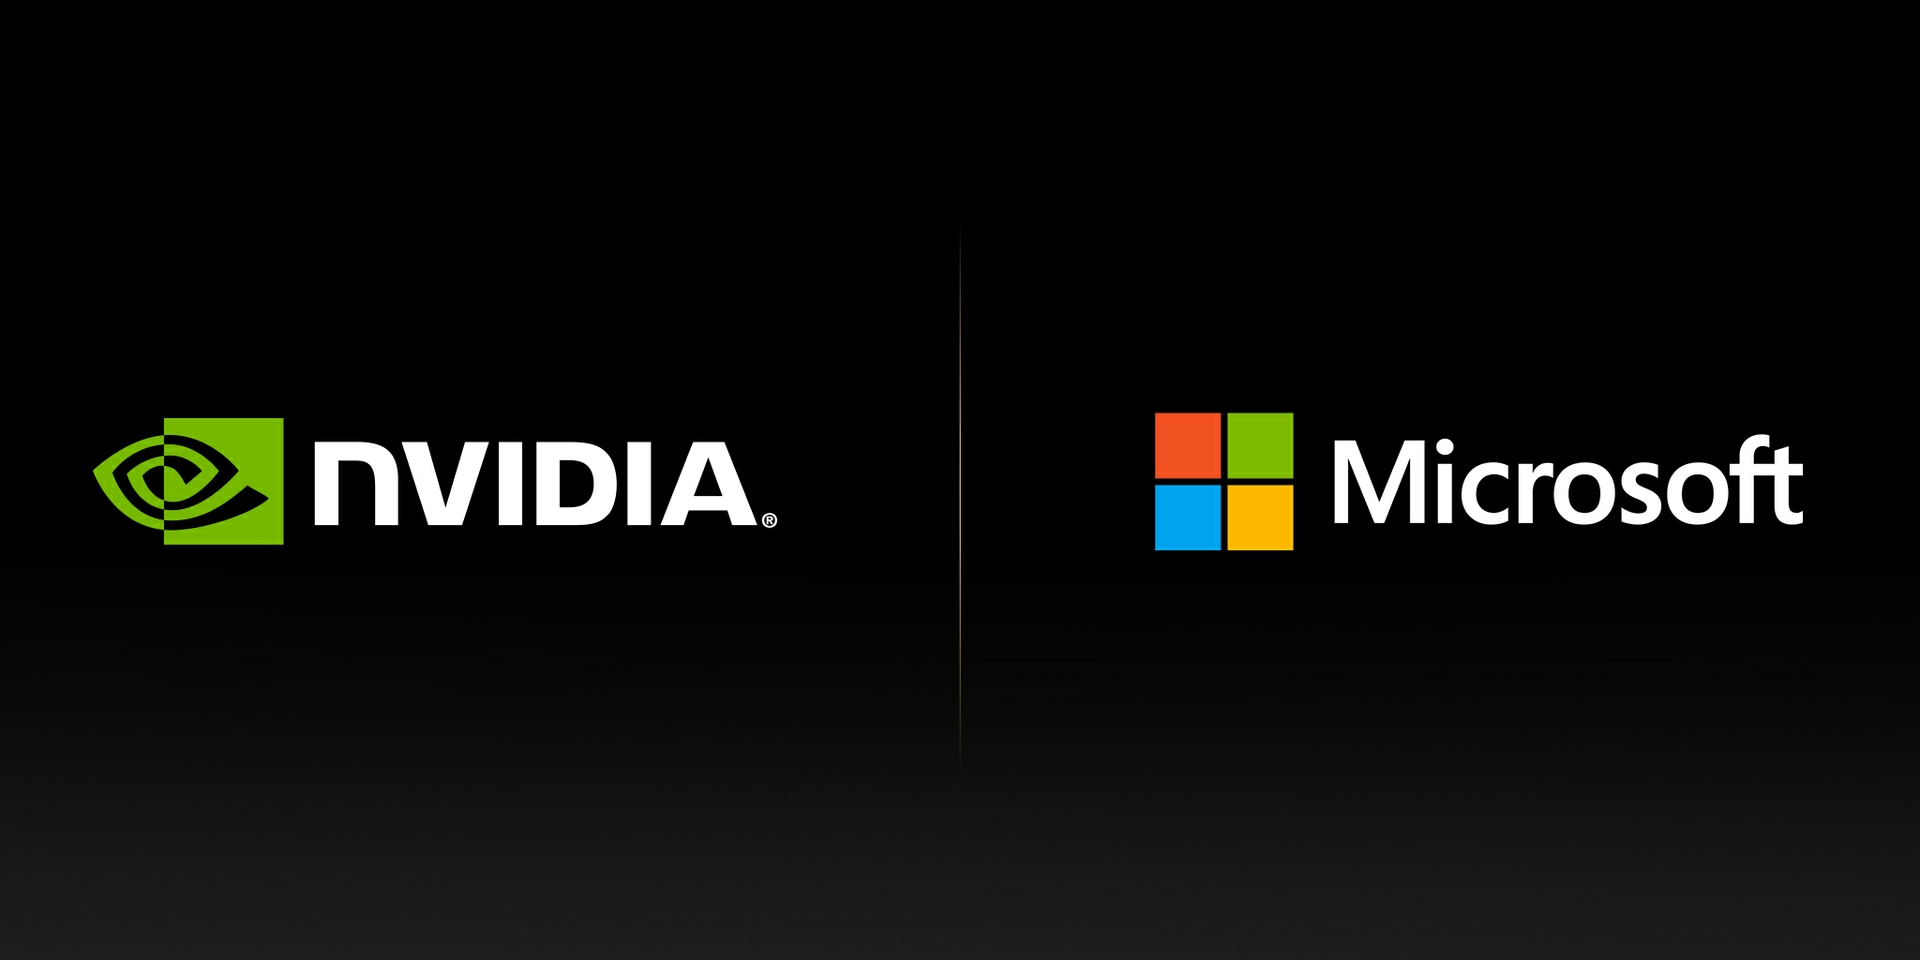 Microsoft and NVIDIA will make it easier for developers to use AI models on Windows